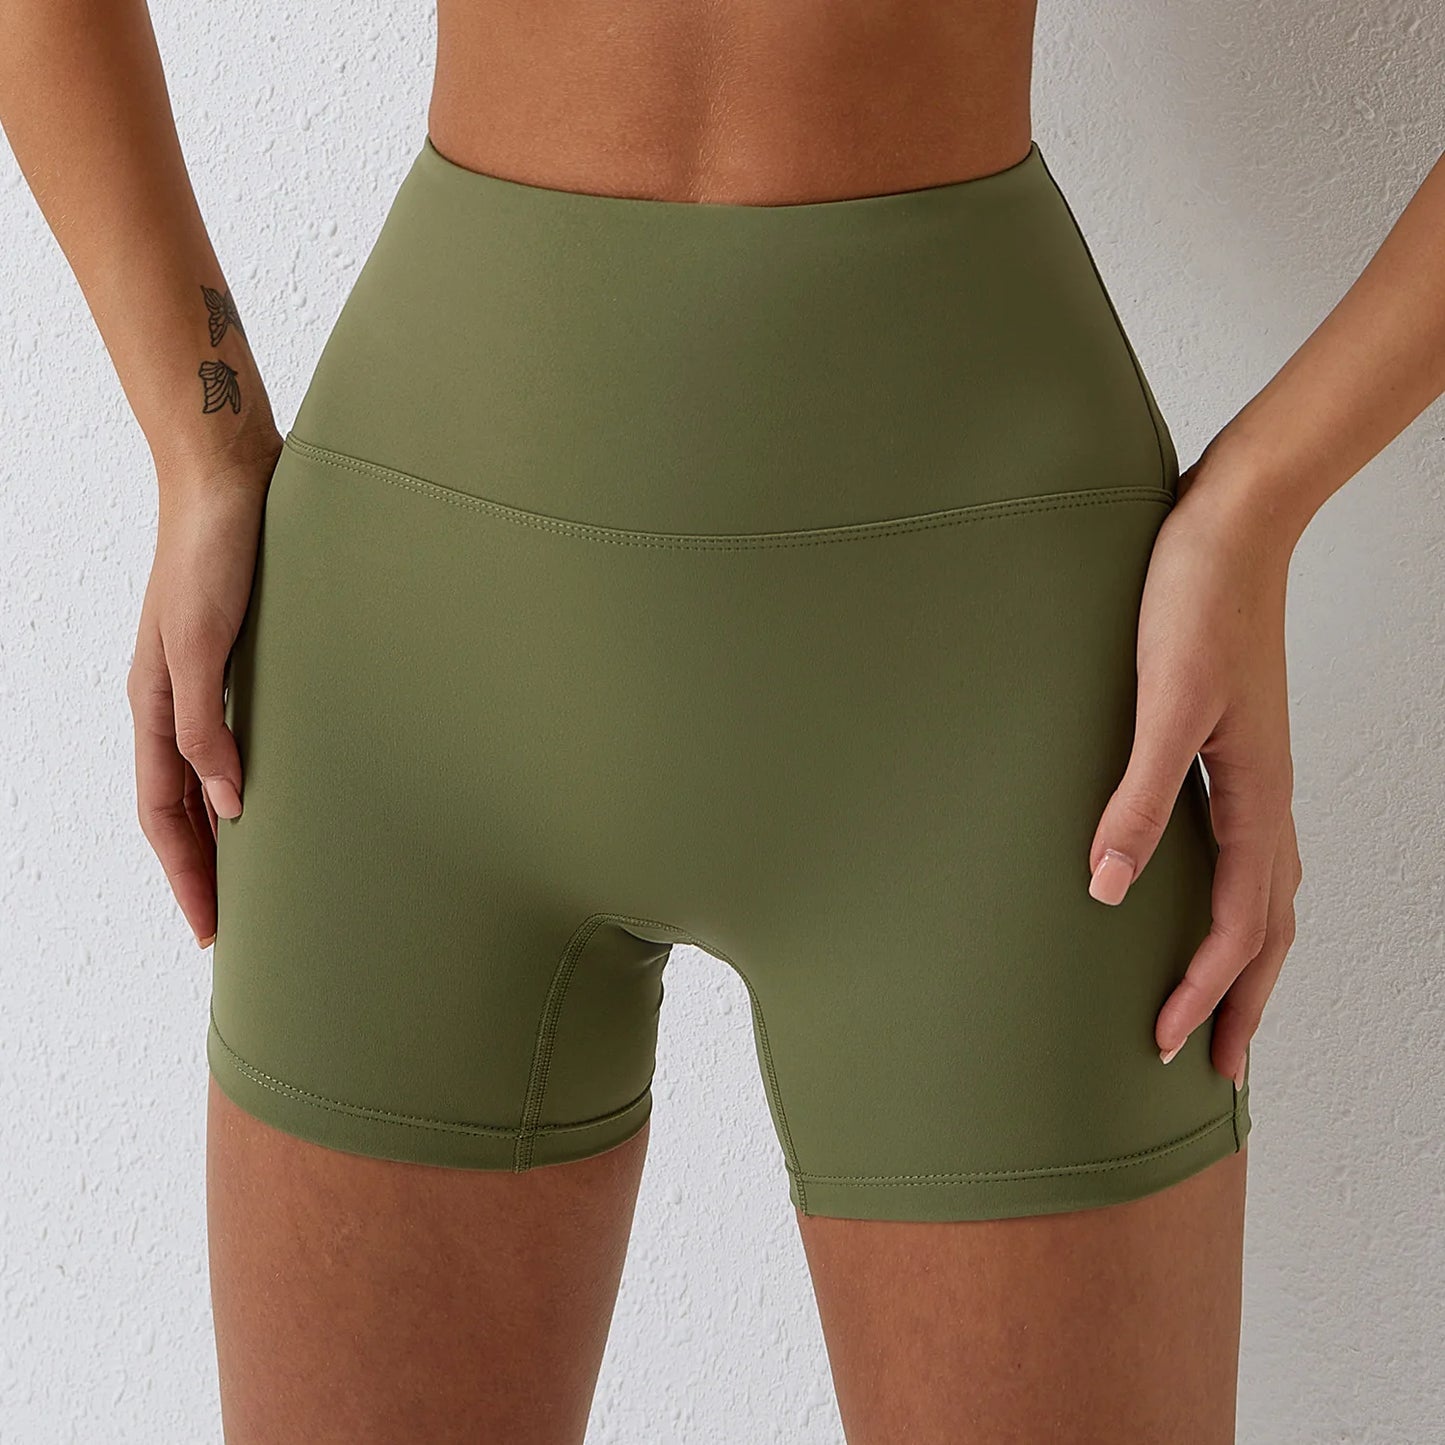 
                  
                    Women's Nude Feel Yoga Shorts Quick Dry High Waist Buttock Lifting Sports Shorts Running Exercise Gym Tight Sports Shorts Women
                  
                